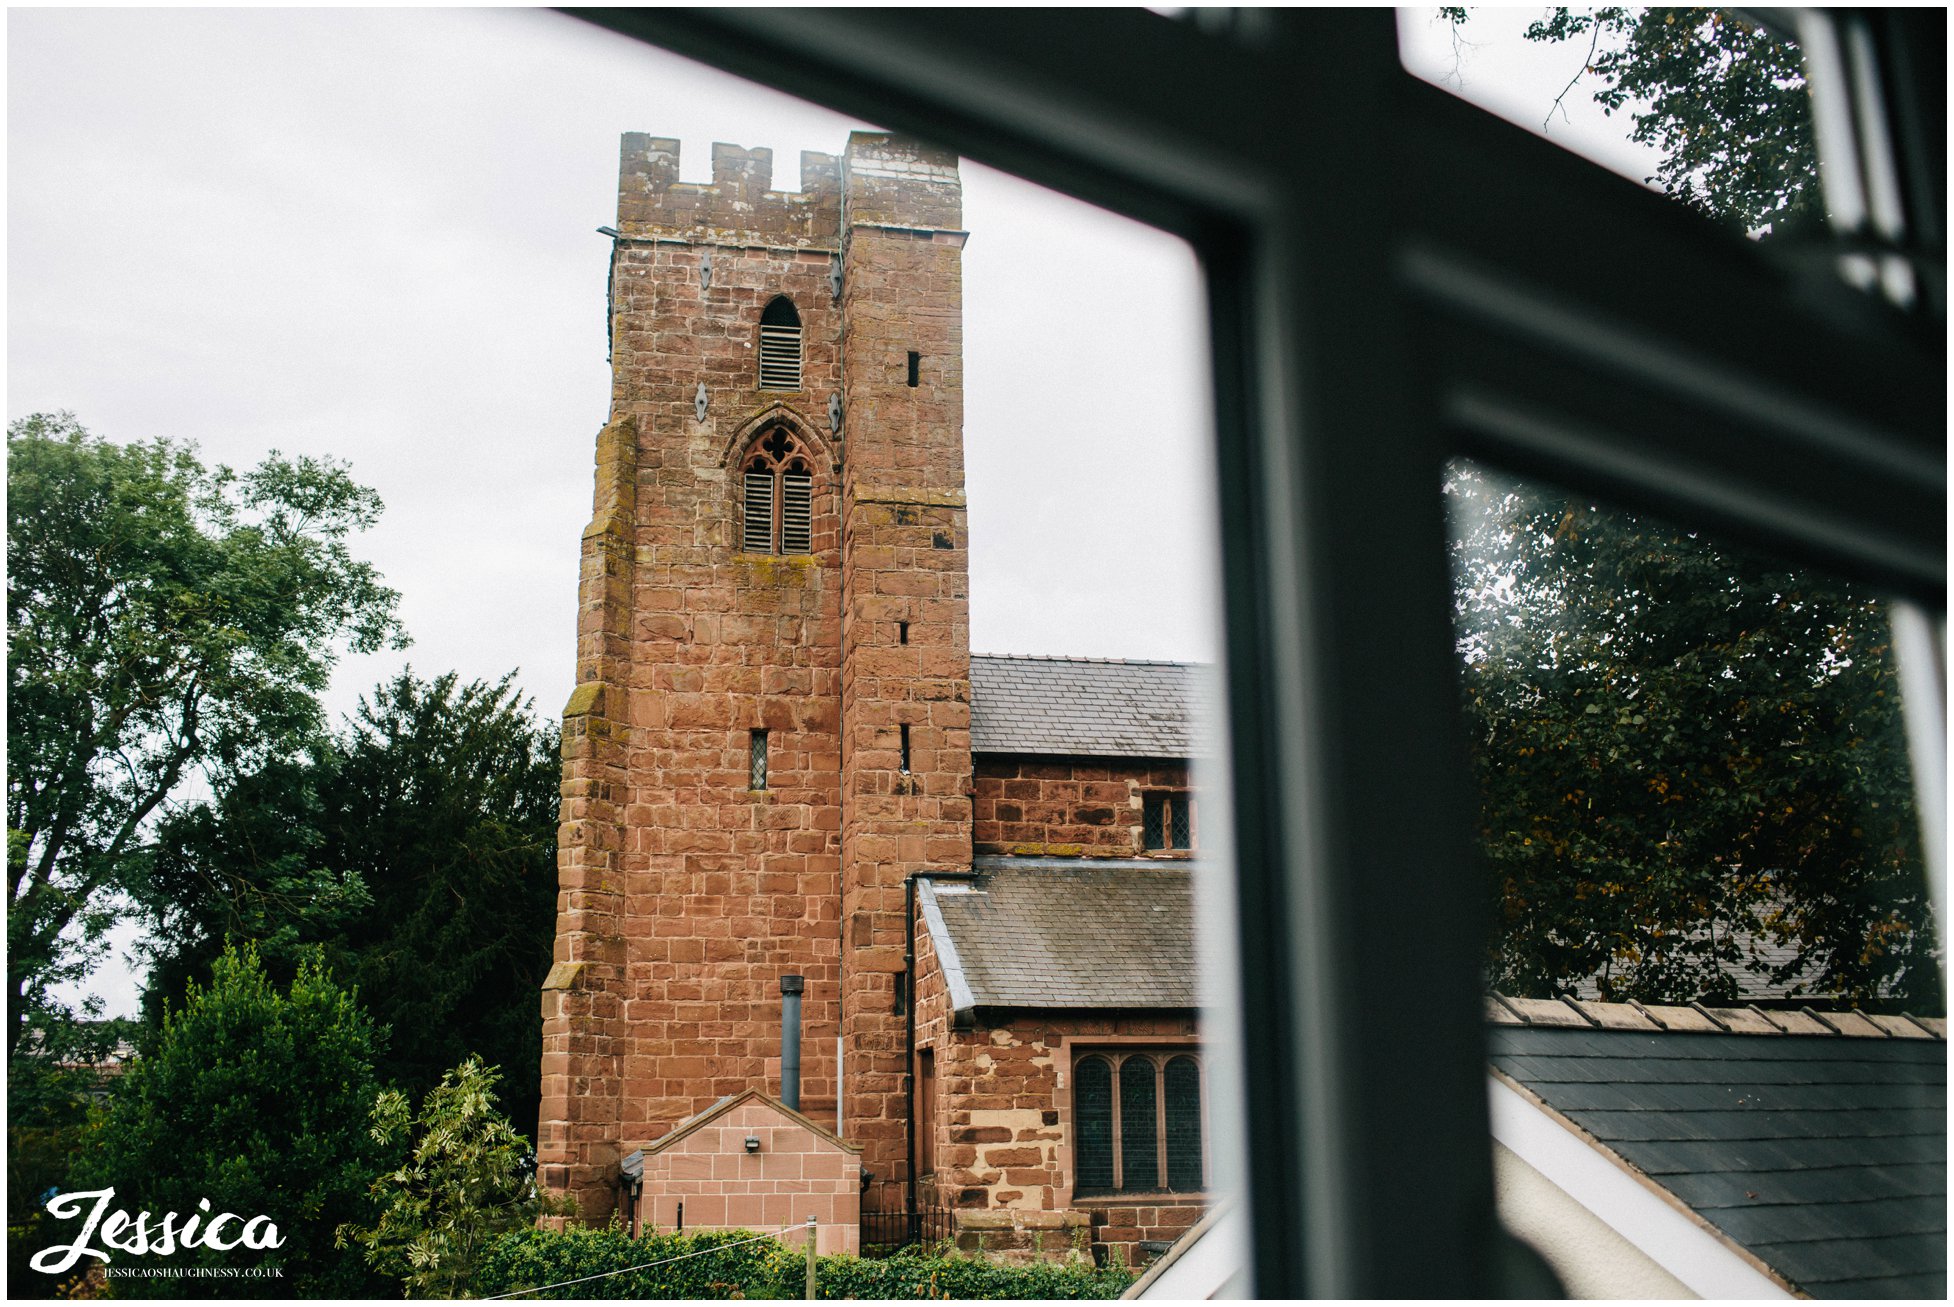 view of st chad's church in farndon taken from the bride's bedroom